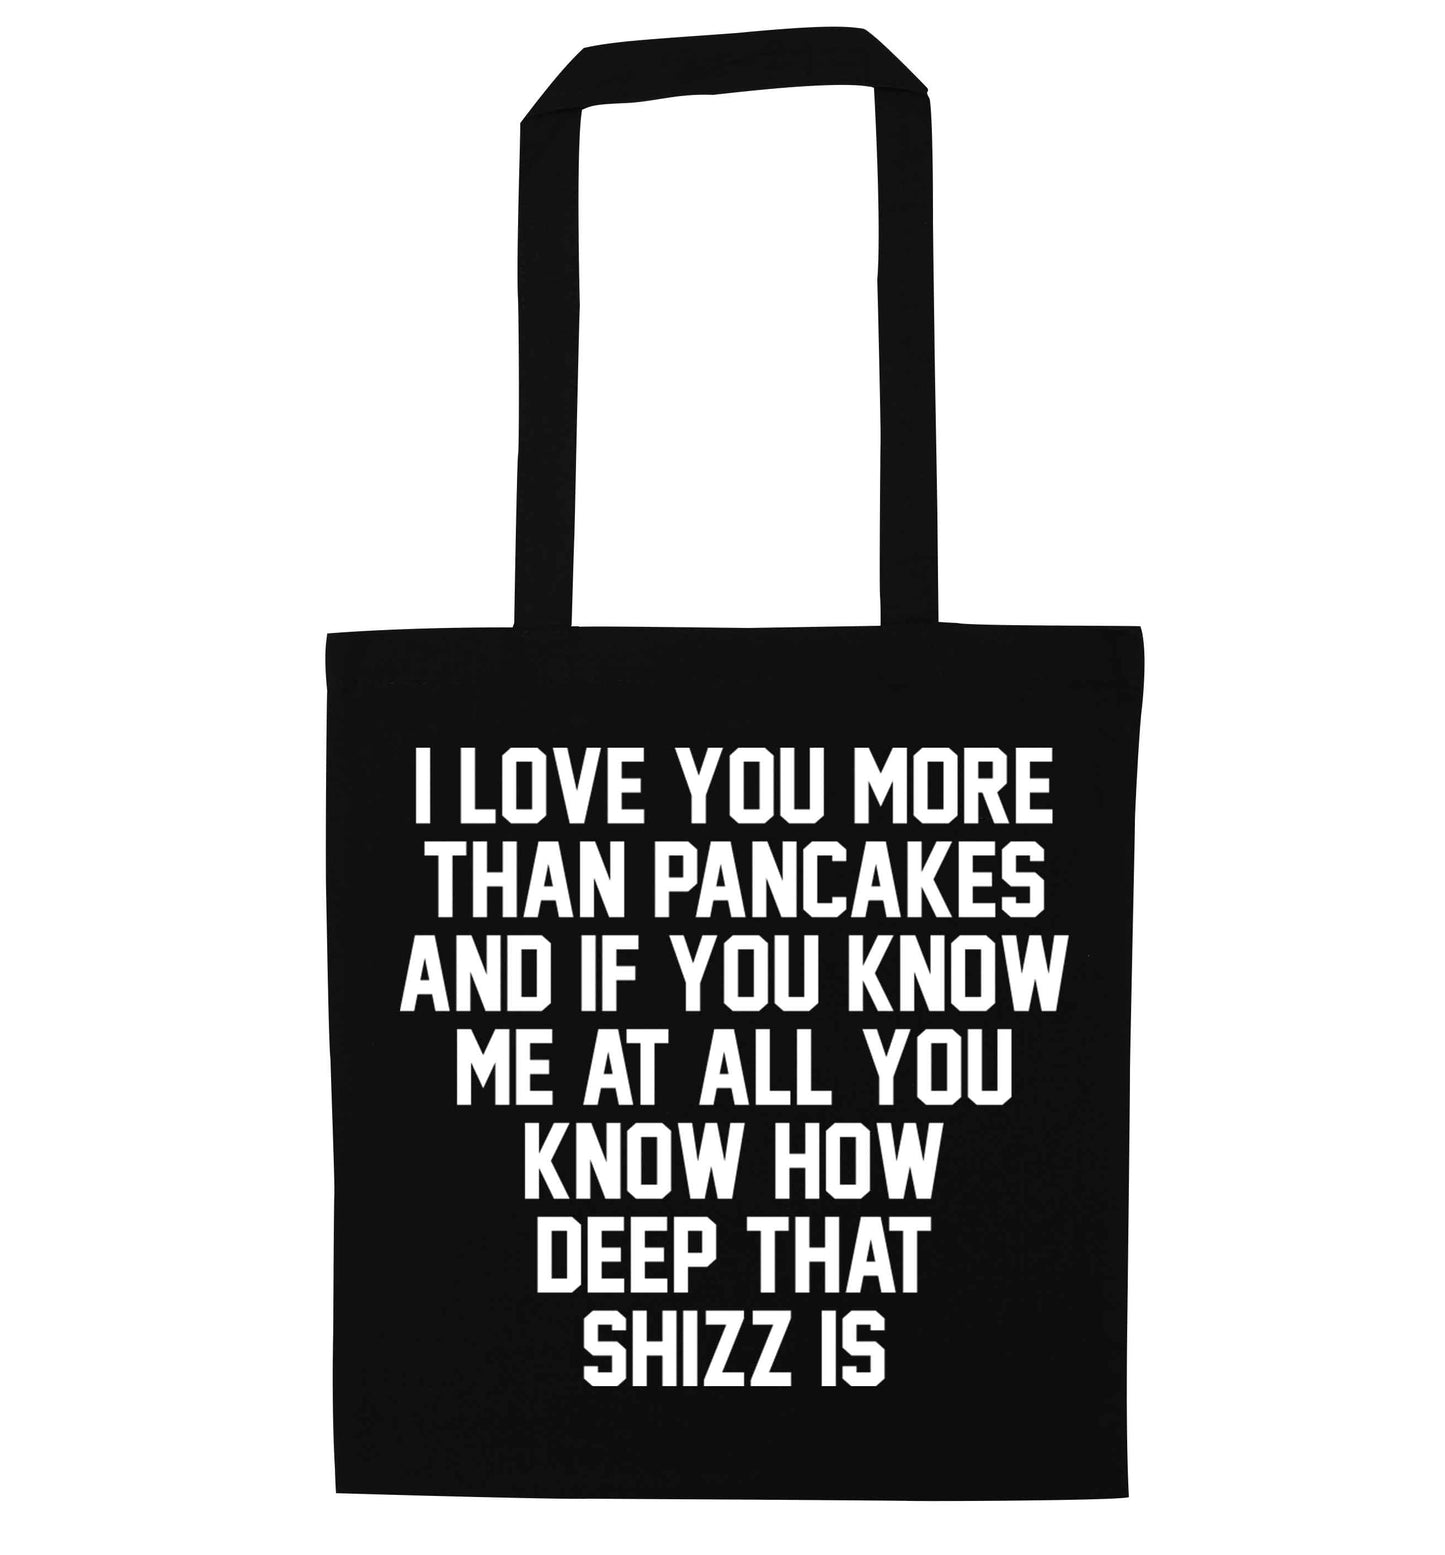 I love you more than pancakes and if you know me at all you know how deep that shizz is black tote bag